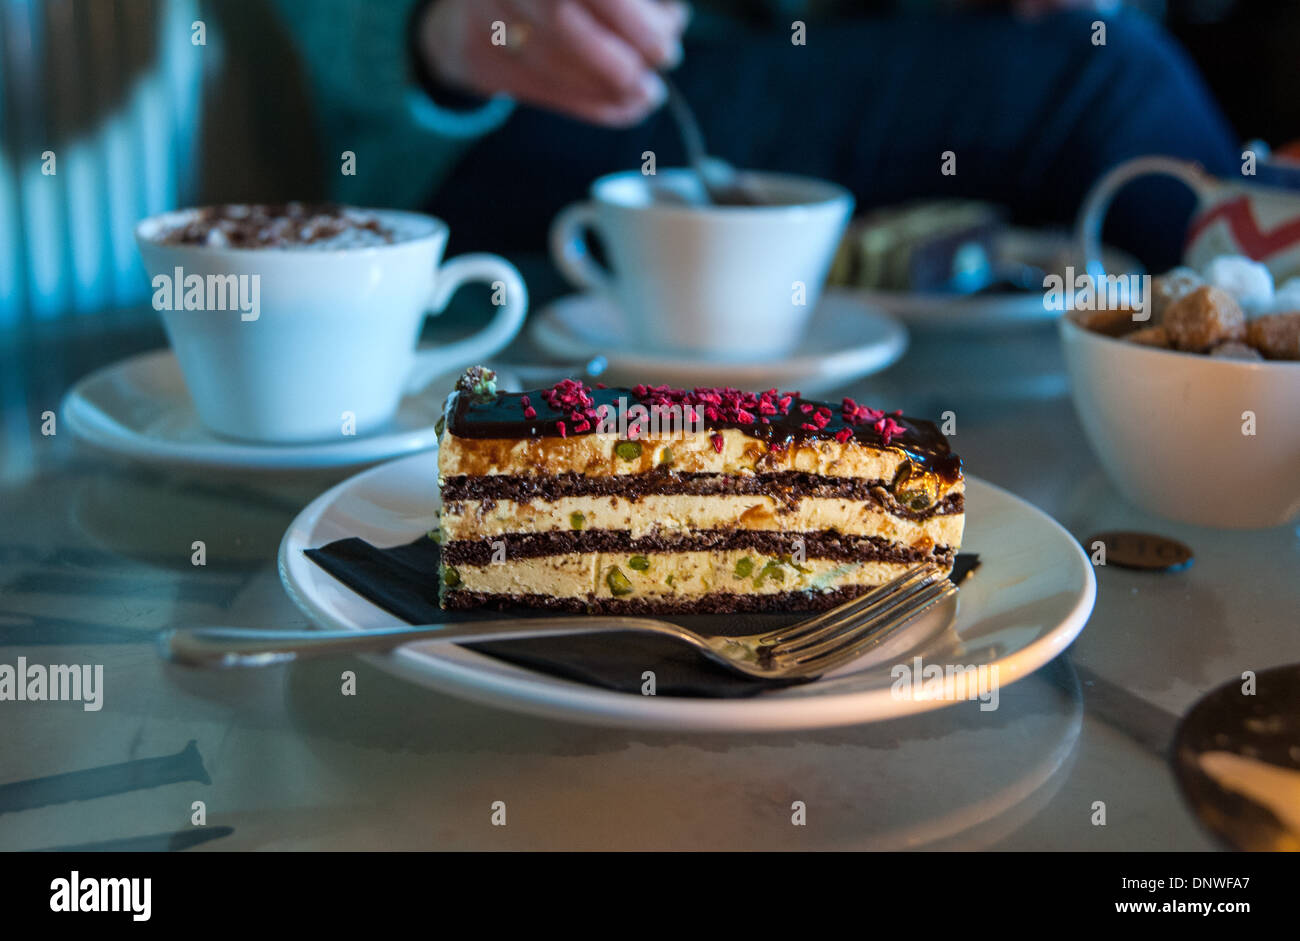 Chocolate and Pistachio nut cake afternoon tea and coffee with candle light Stock Photo